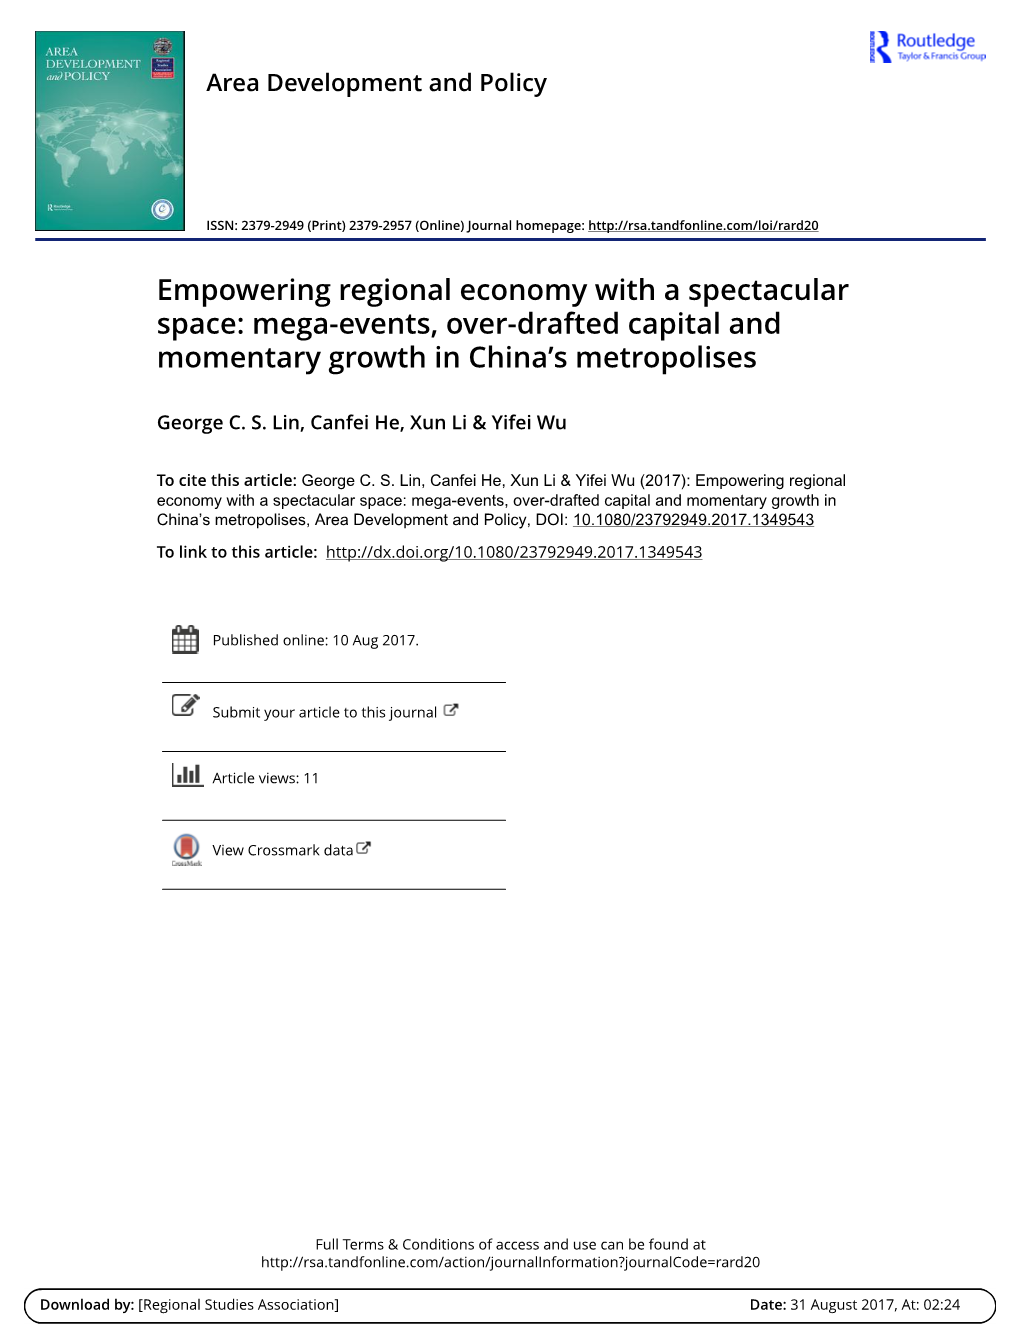 Mega-Events, Over-Drafted Capital and Momentary Growth in China's Metrop